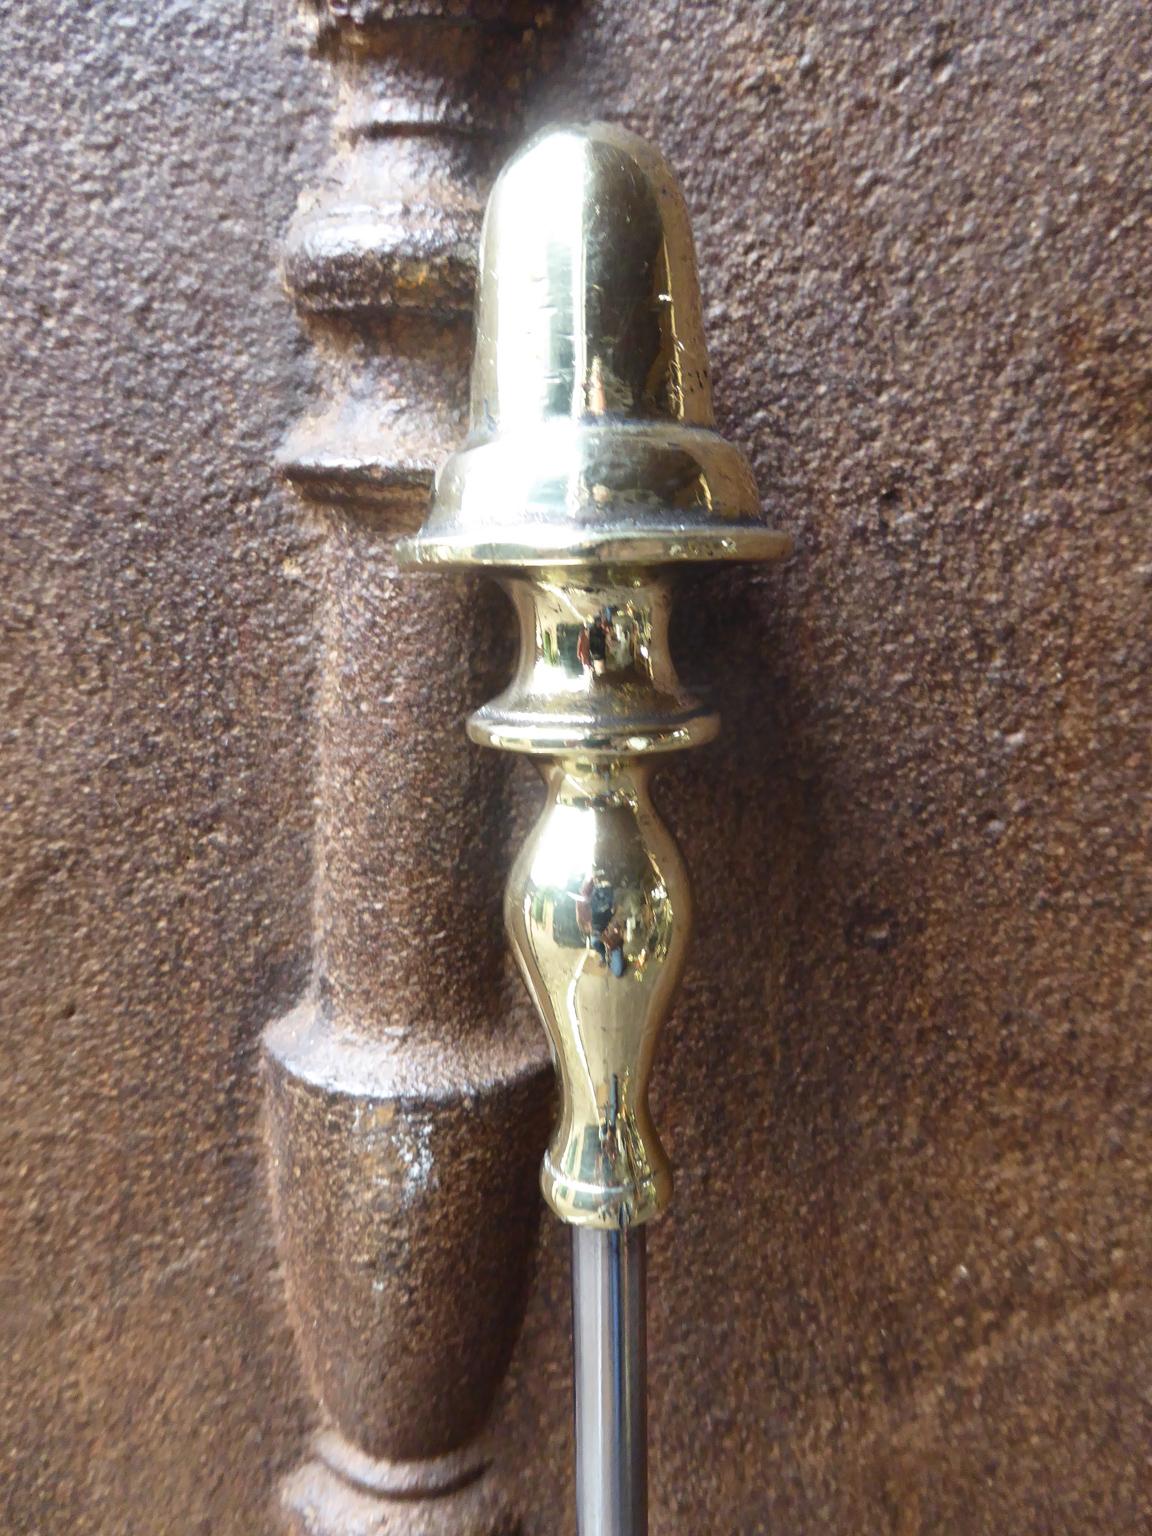 19th century English Victorian fireplace poker made of polished steel and polished brass.







